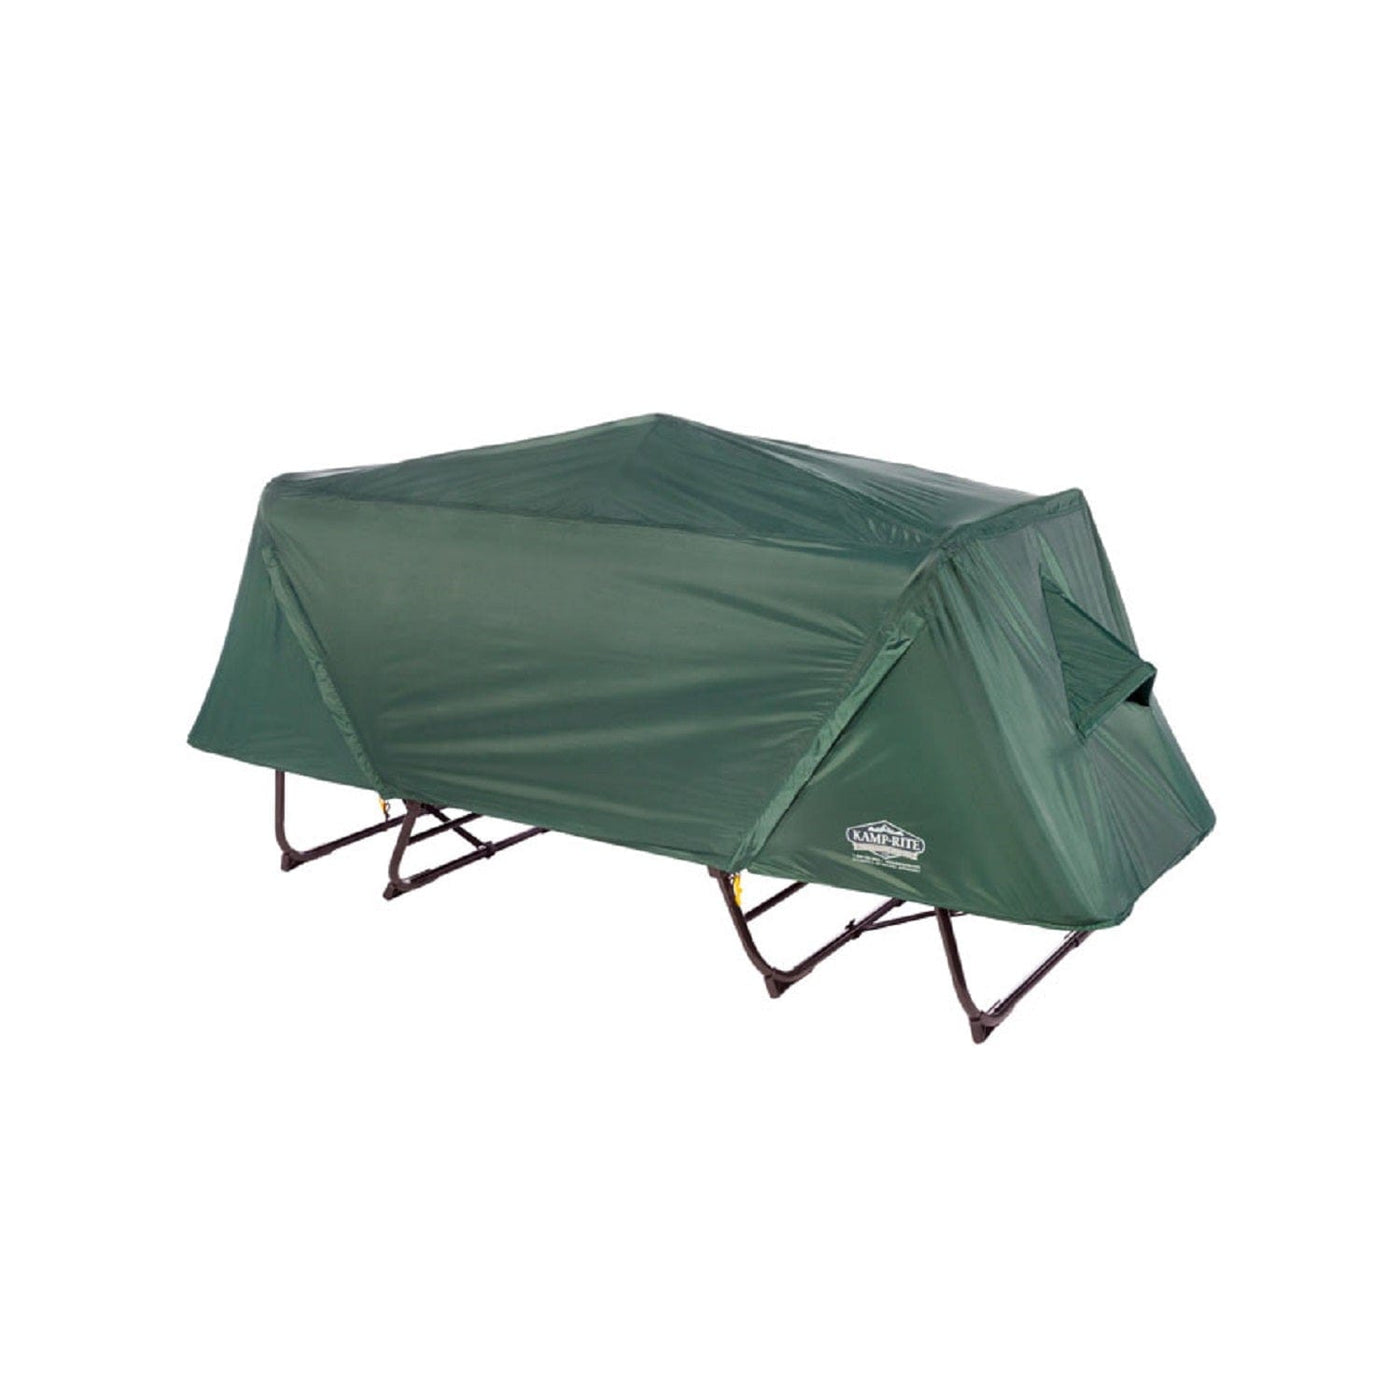 Kamp-Rite Kamp-Rite Tent Cot Oversized Tent Cot w R F   DTC443 Camping And Outdoor